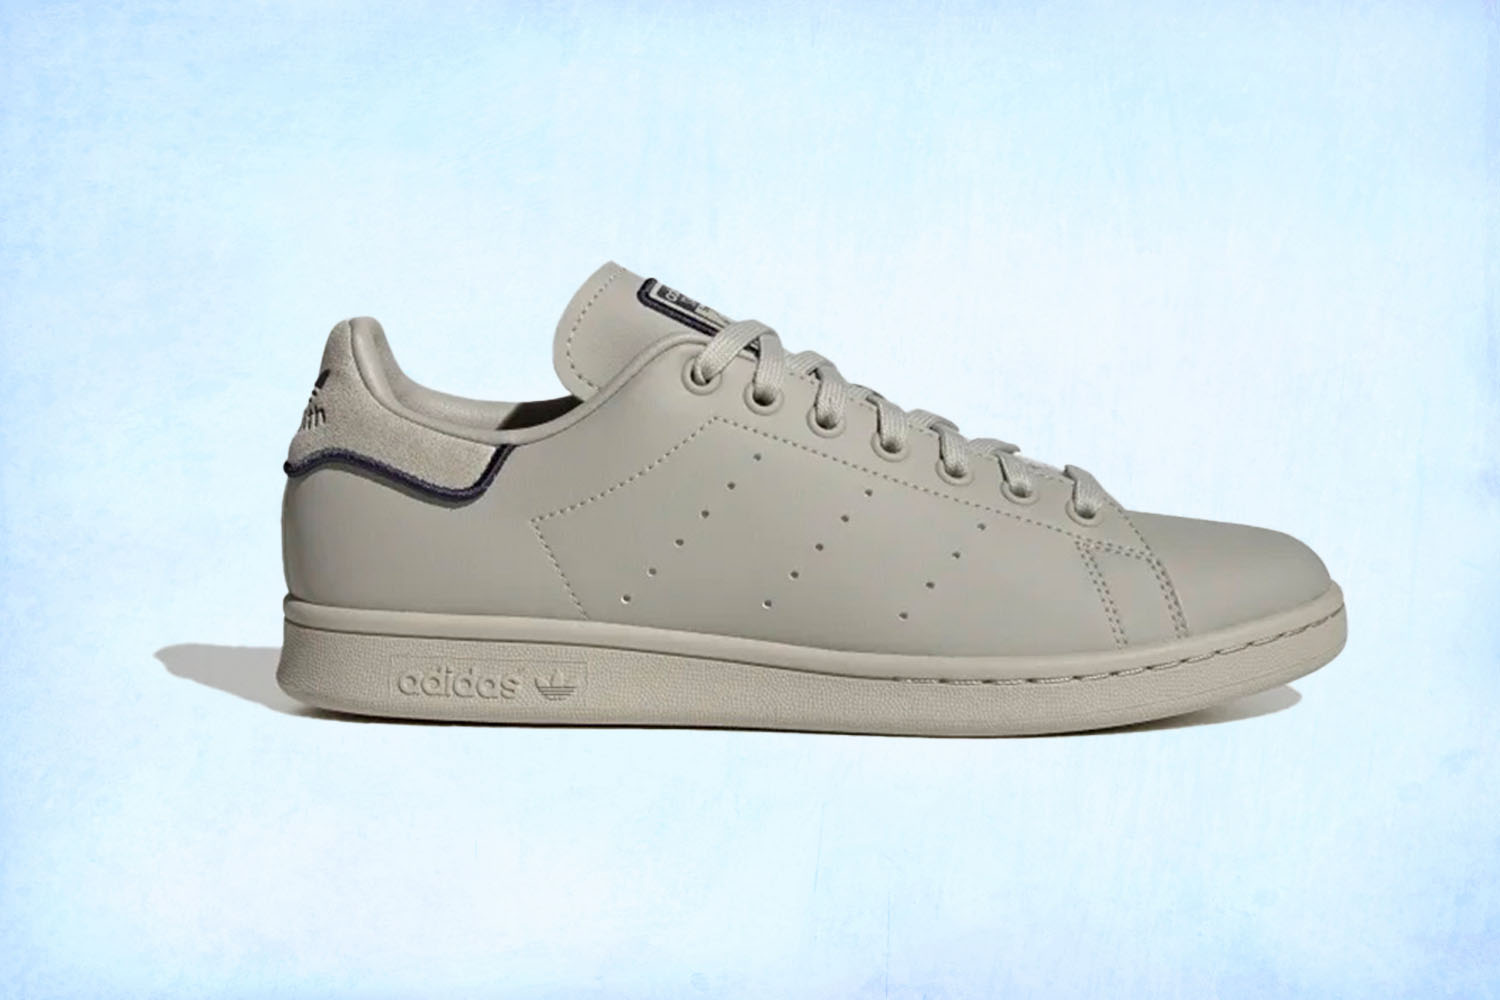 a tan Adidas Stan Smith sneaker on a light blue background